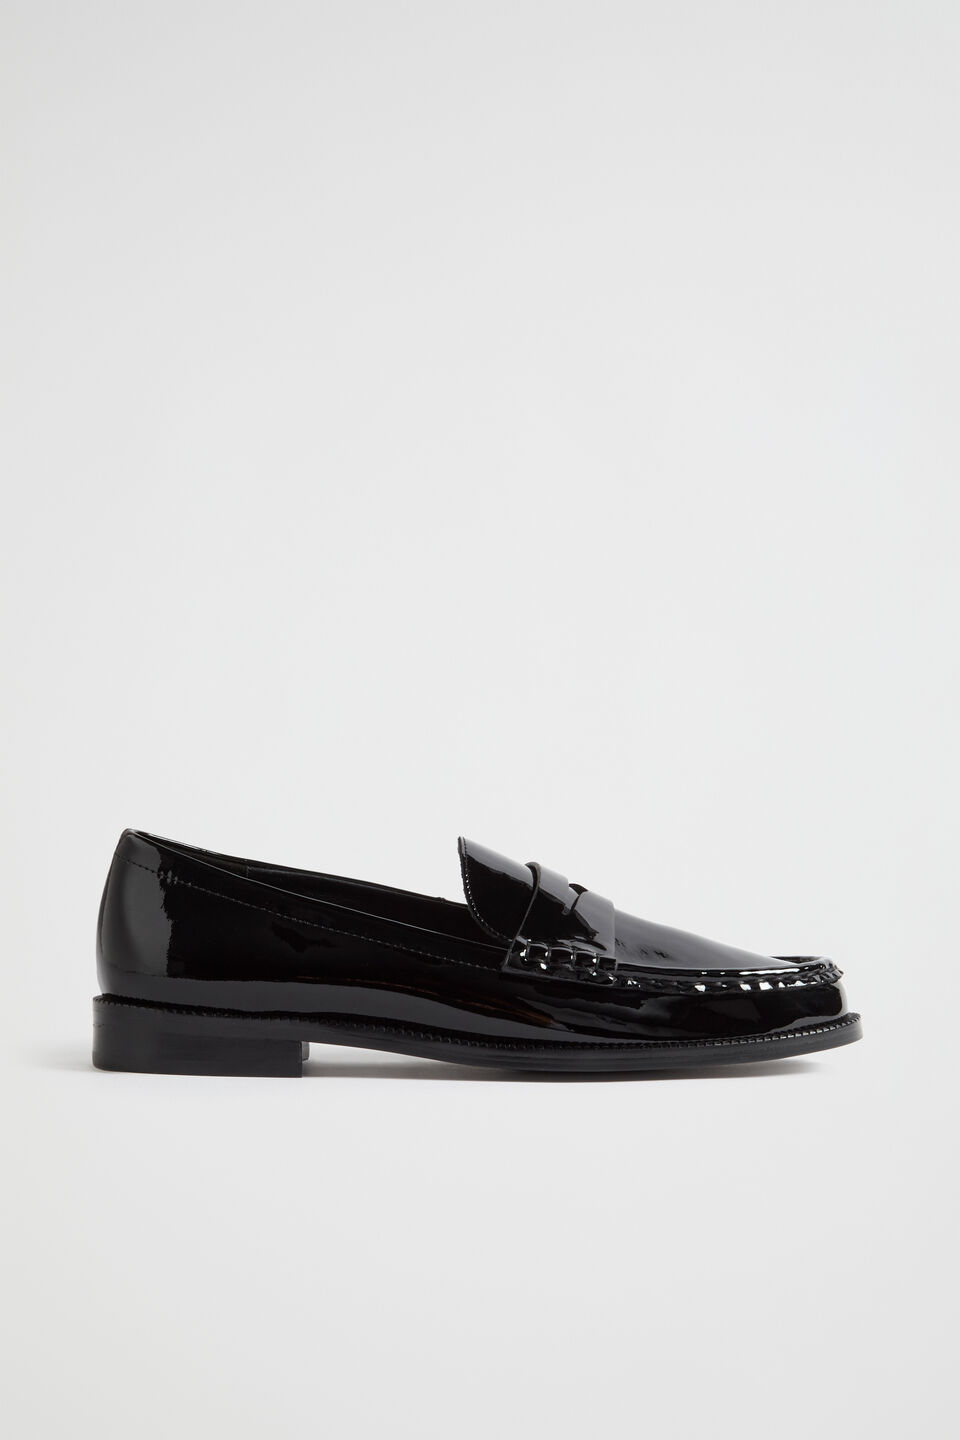 Kendall Loafer  Black Patent